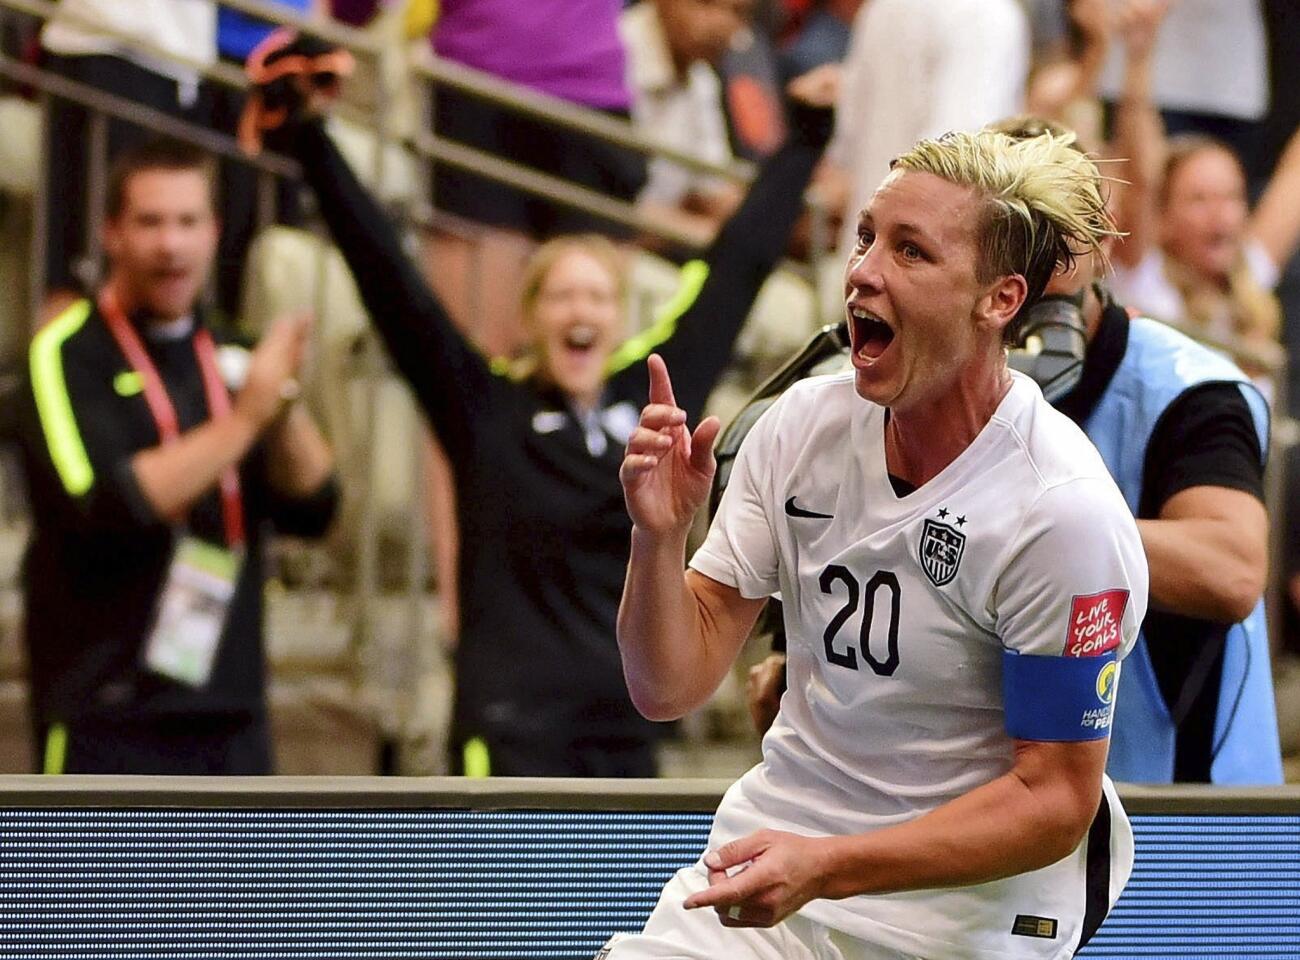 United States forward Abby Wambach celebrates after scoring a goal against Nigeria at Women's World Cup in Vancouver